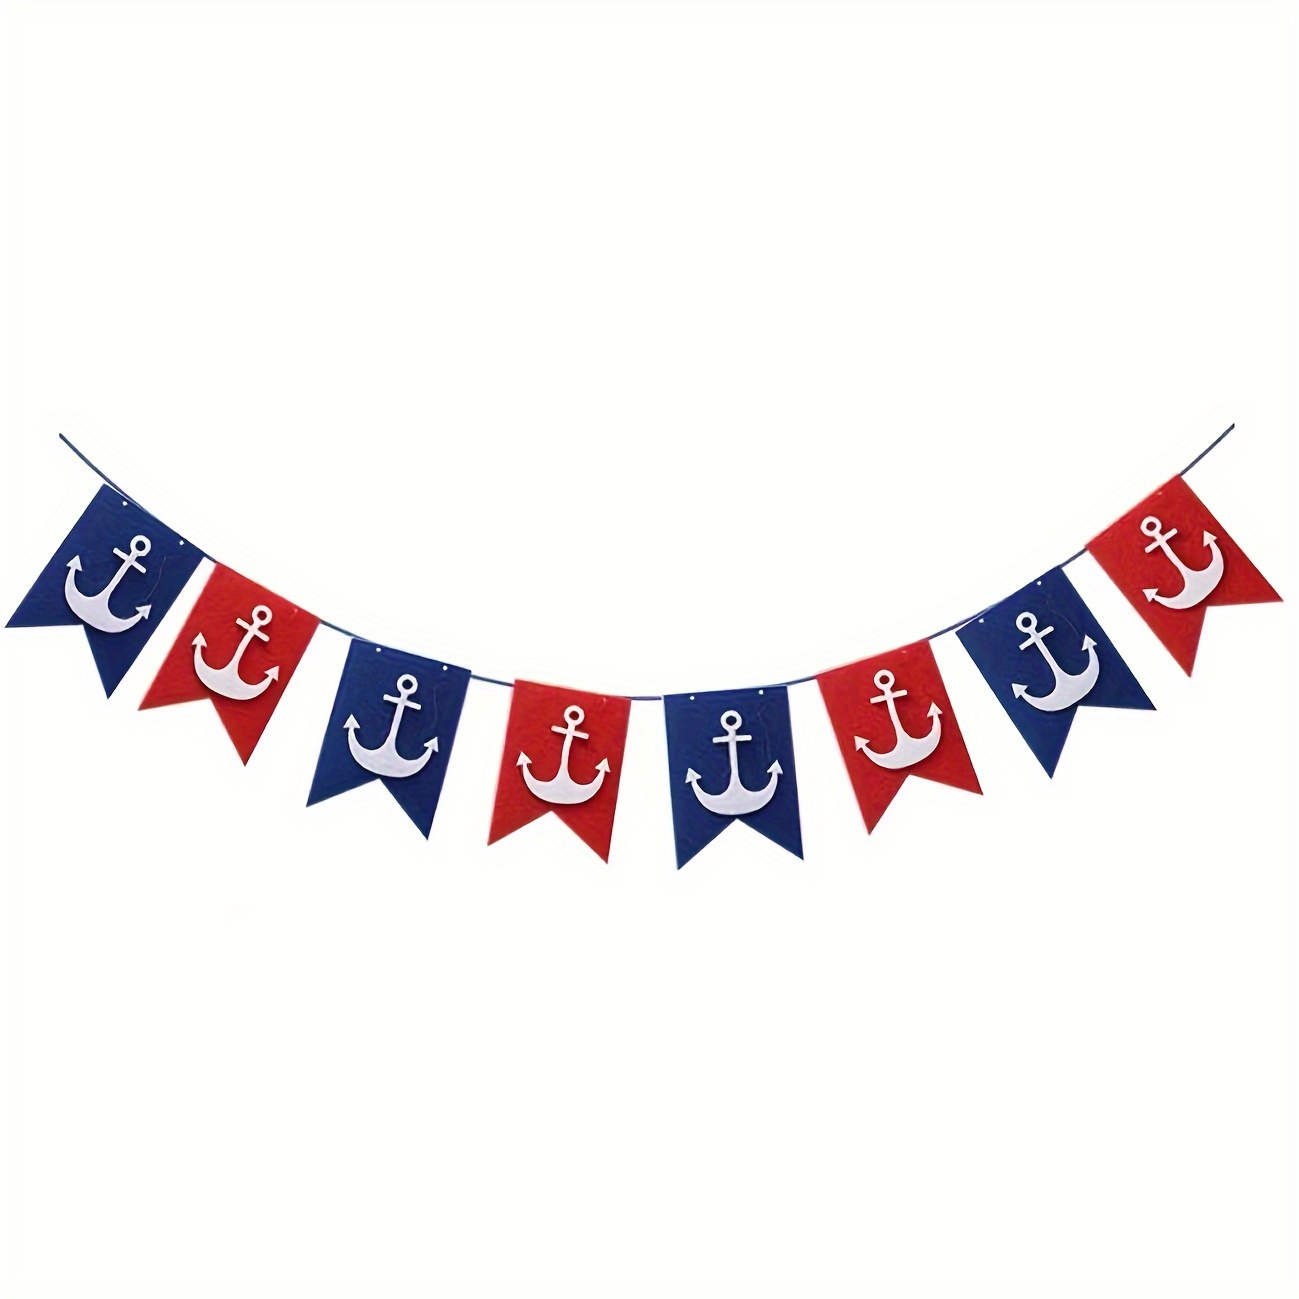 Nautical Party Garland Nautical Garland Nautical Party Decorations